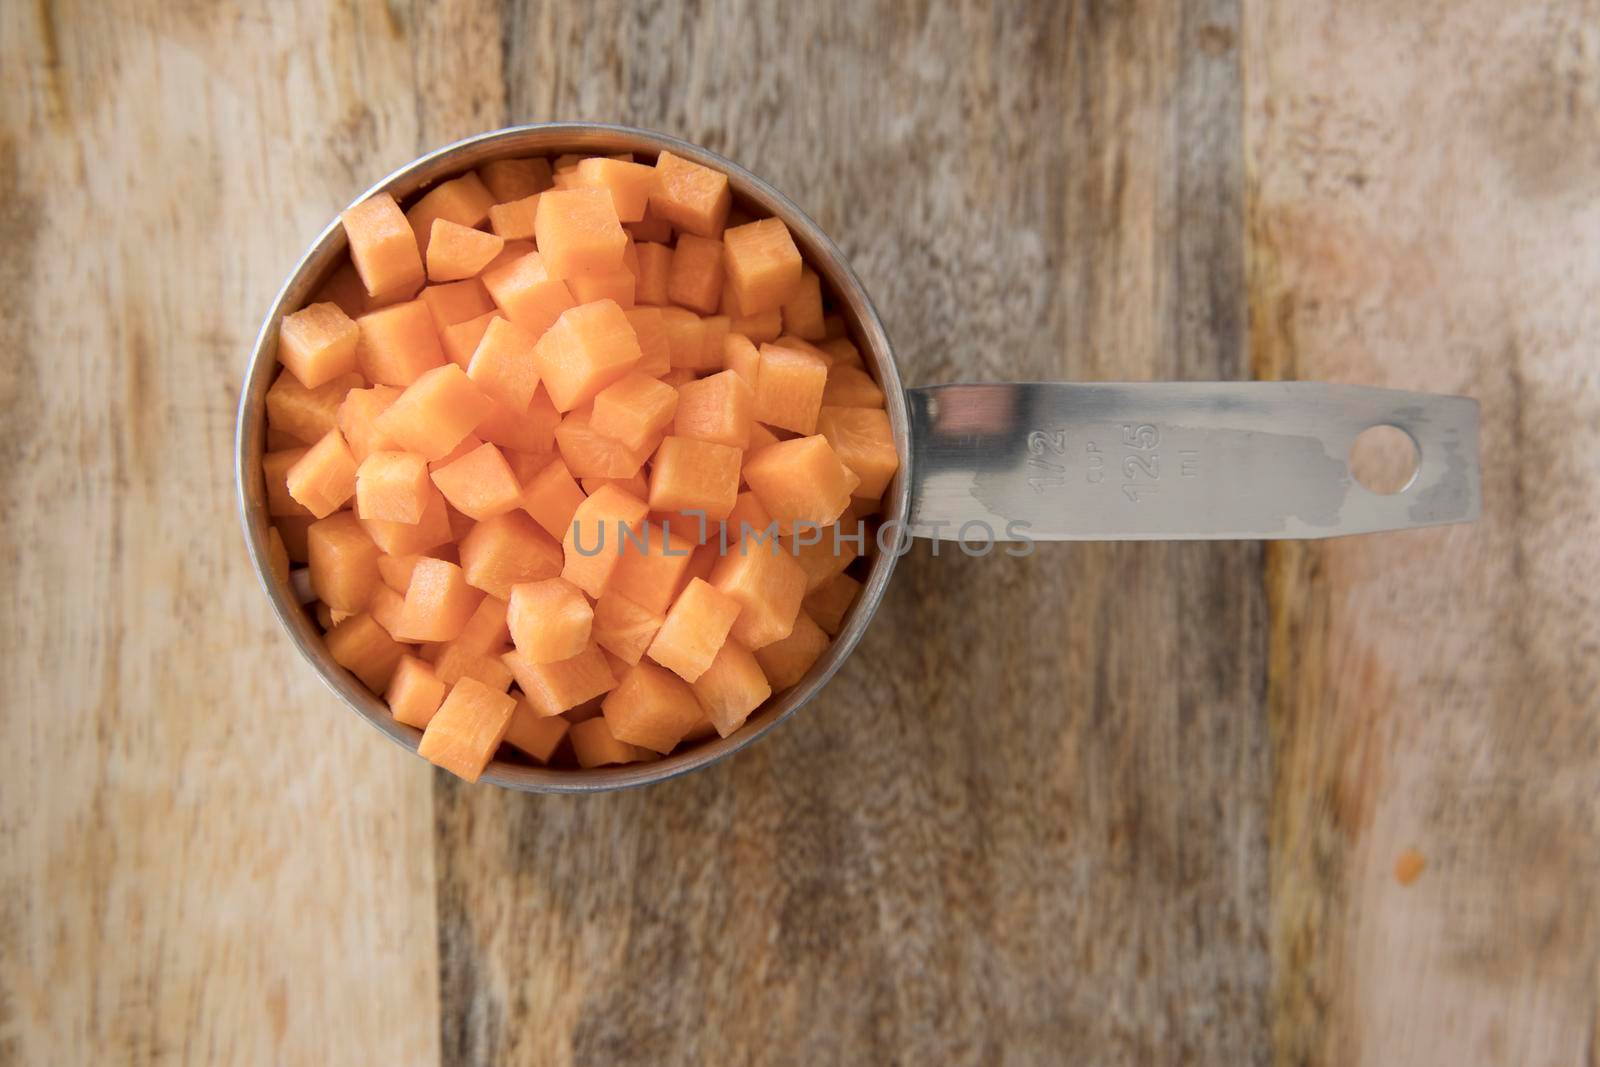 Carrots diced and in a metal measuring cup